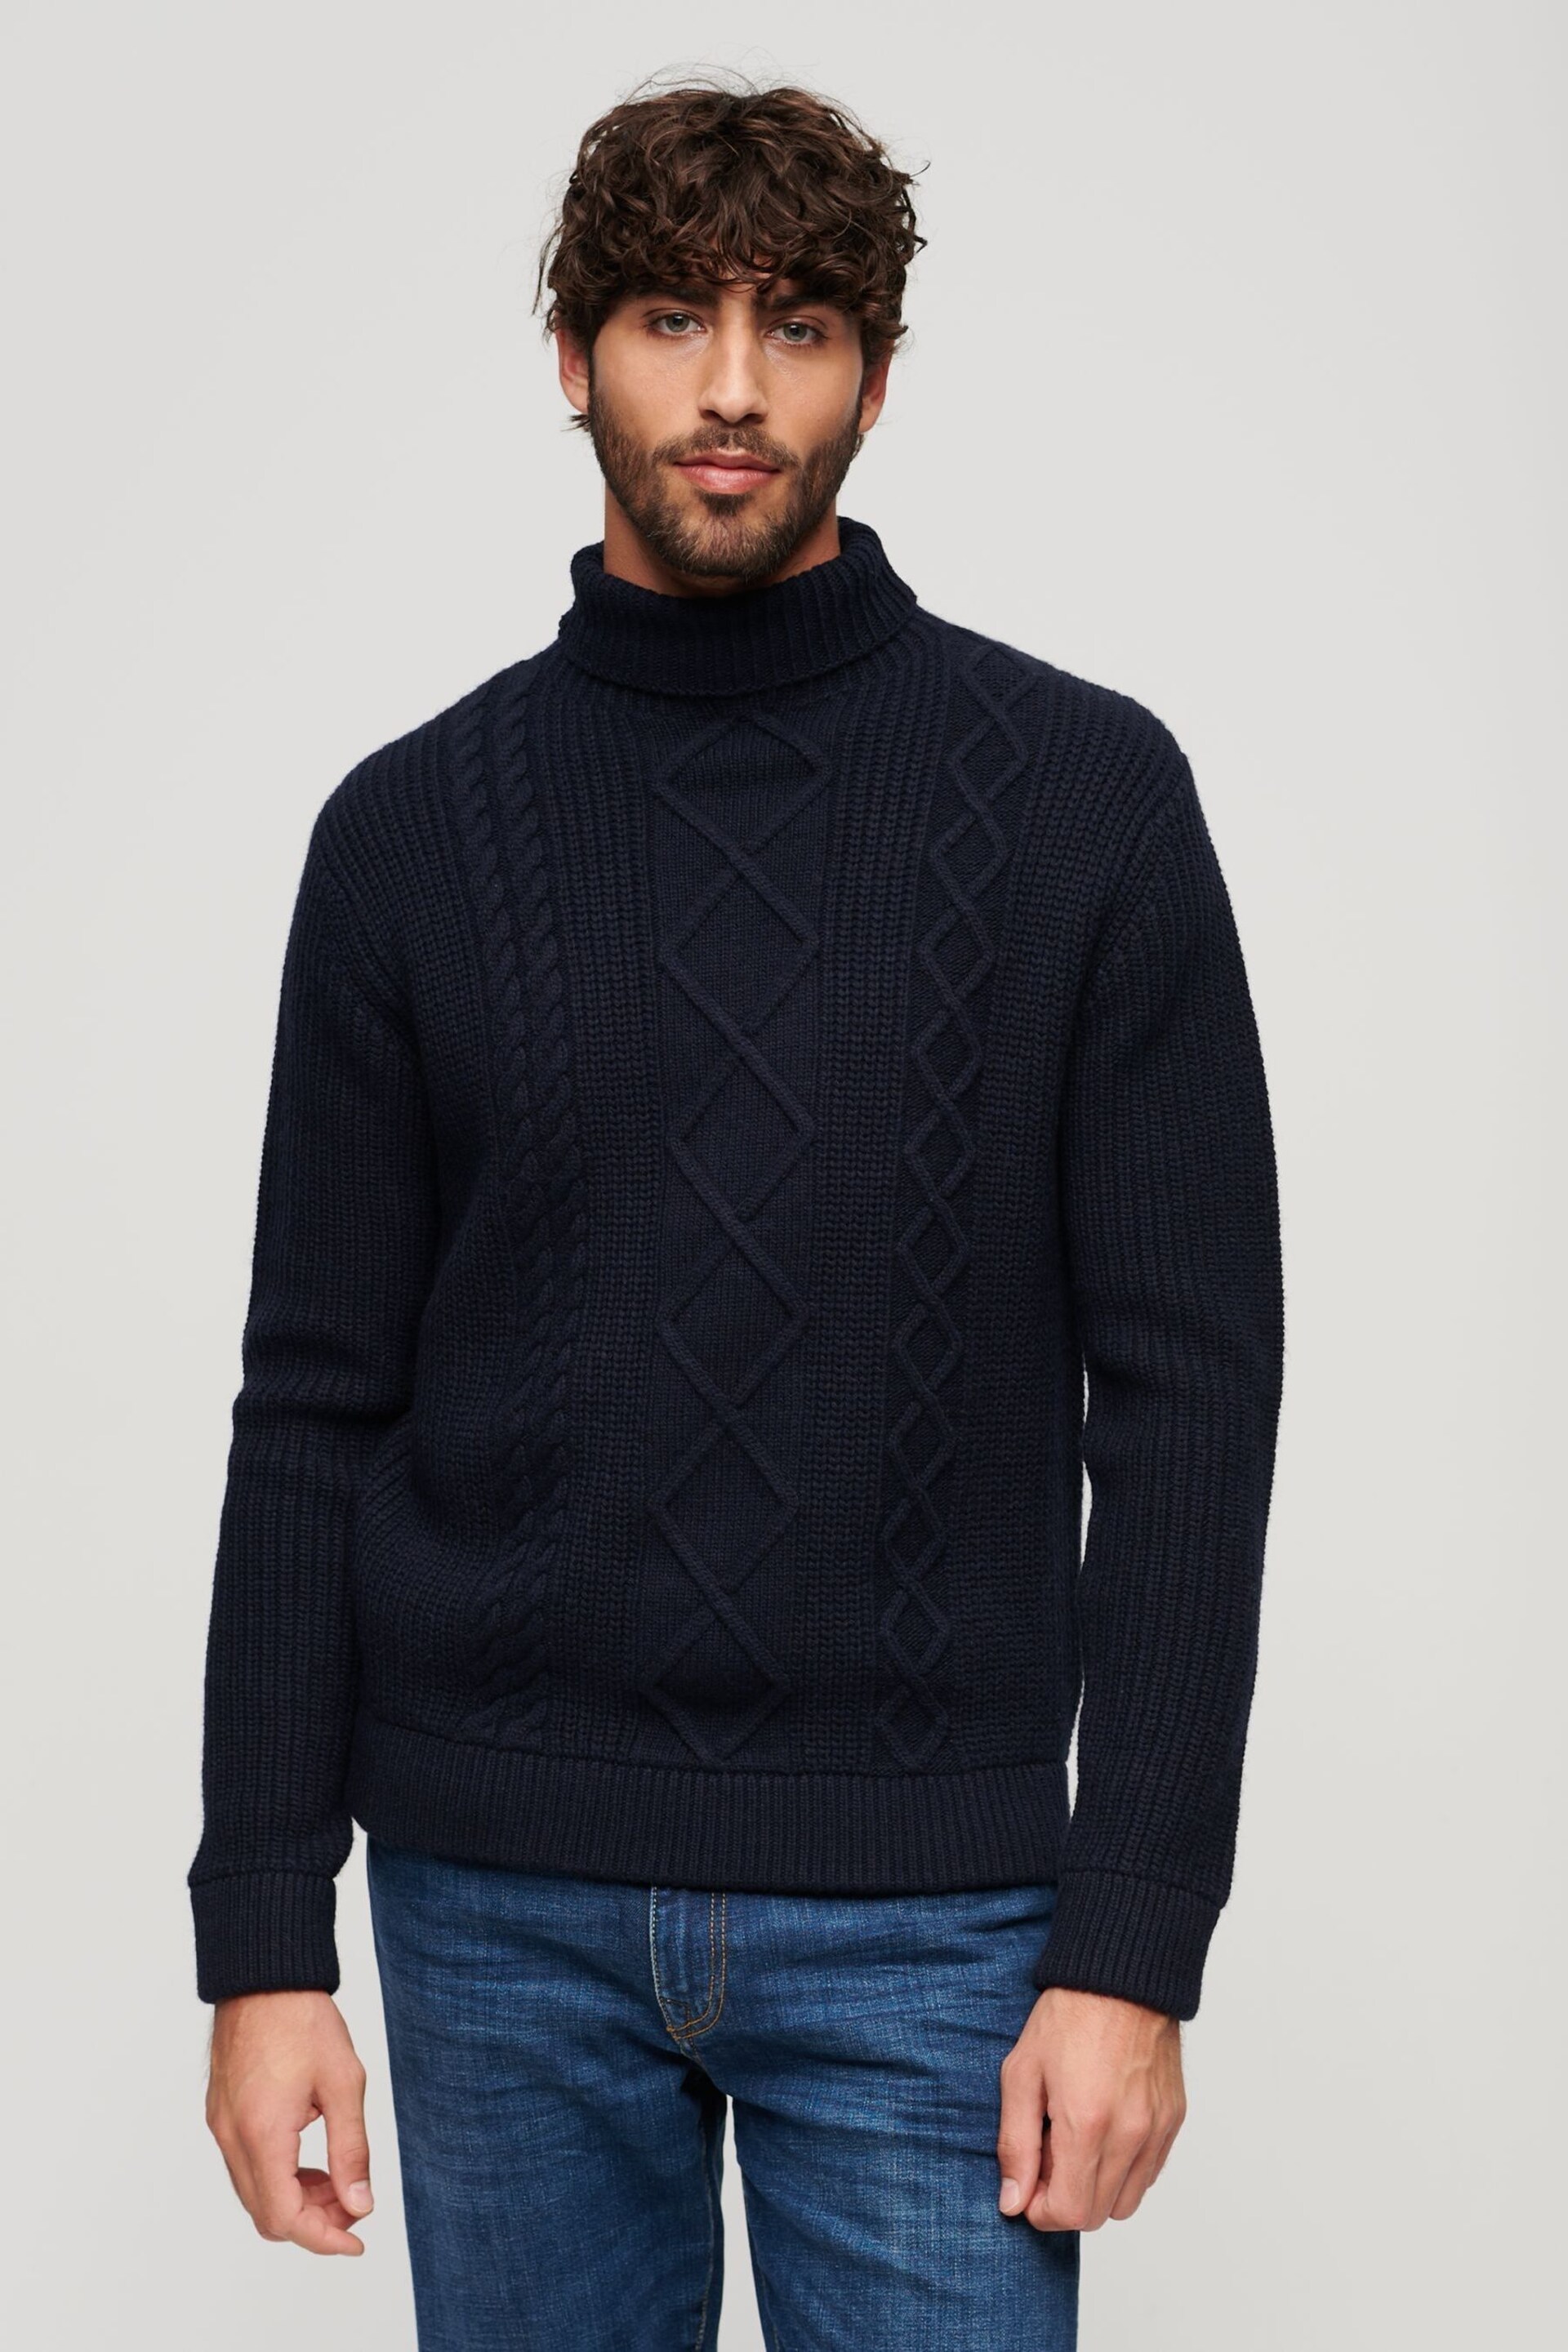 Superdry Blue The Merchant Store Cable Roll Neck Jumper - Image 1 of 3